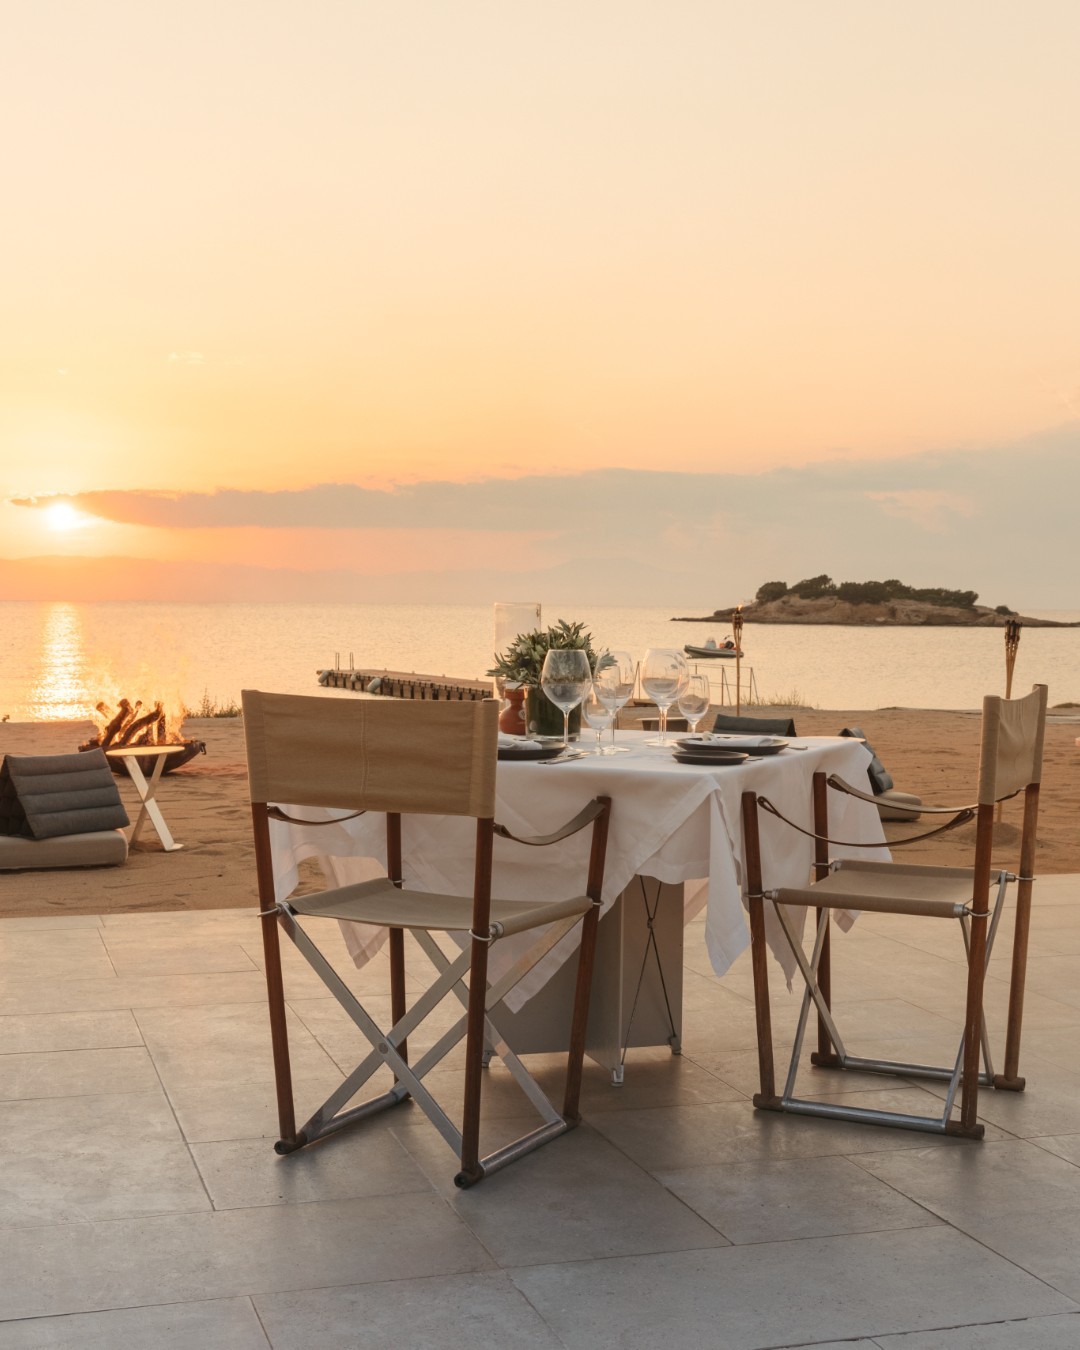 Greek delicacies, typically served with a glass of ouzo at sunset - Europe's 20 Best Outdoor Restaurants